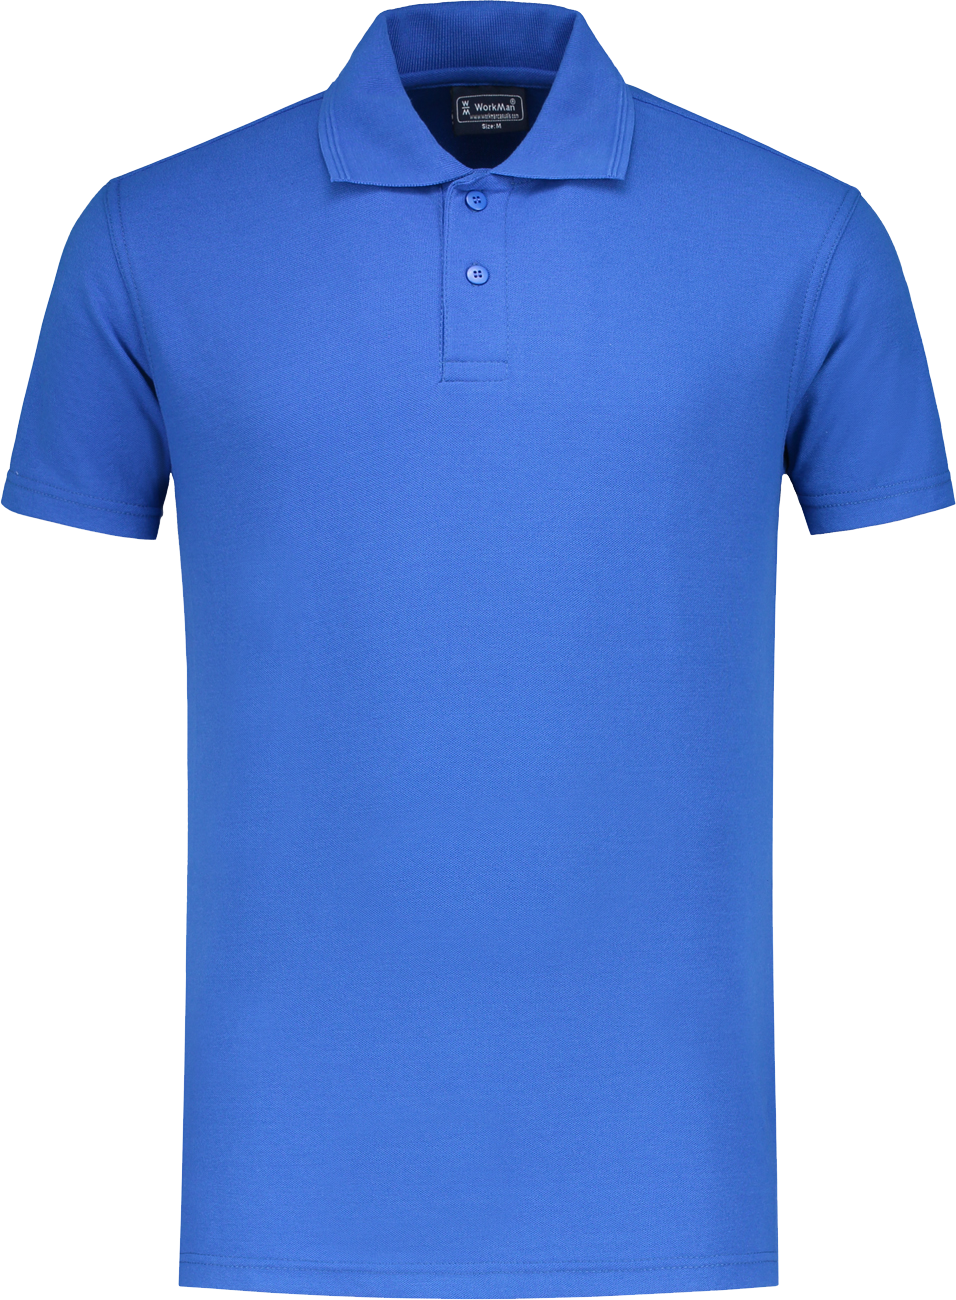 10.6.8104.09 8104 Poloshirt Outfitters Royal Blue 7XL